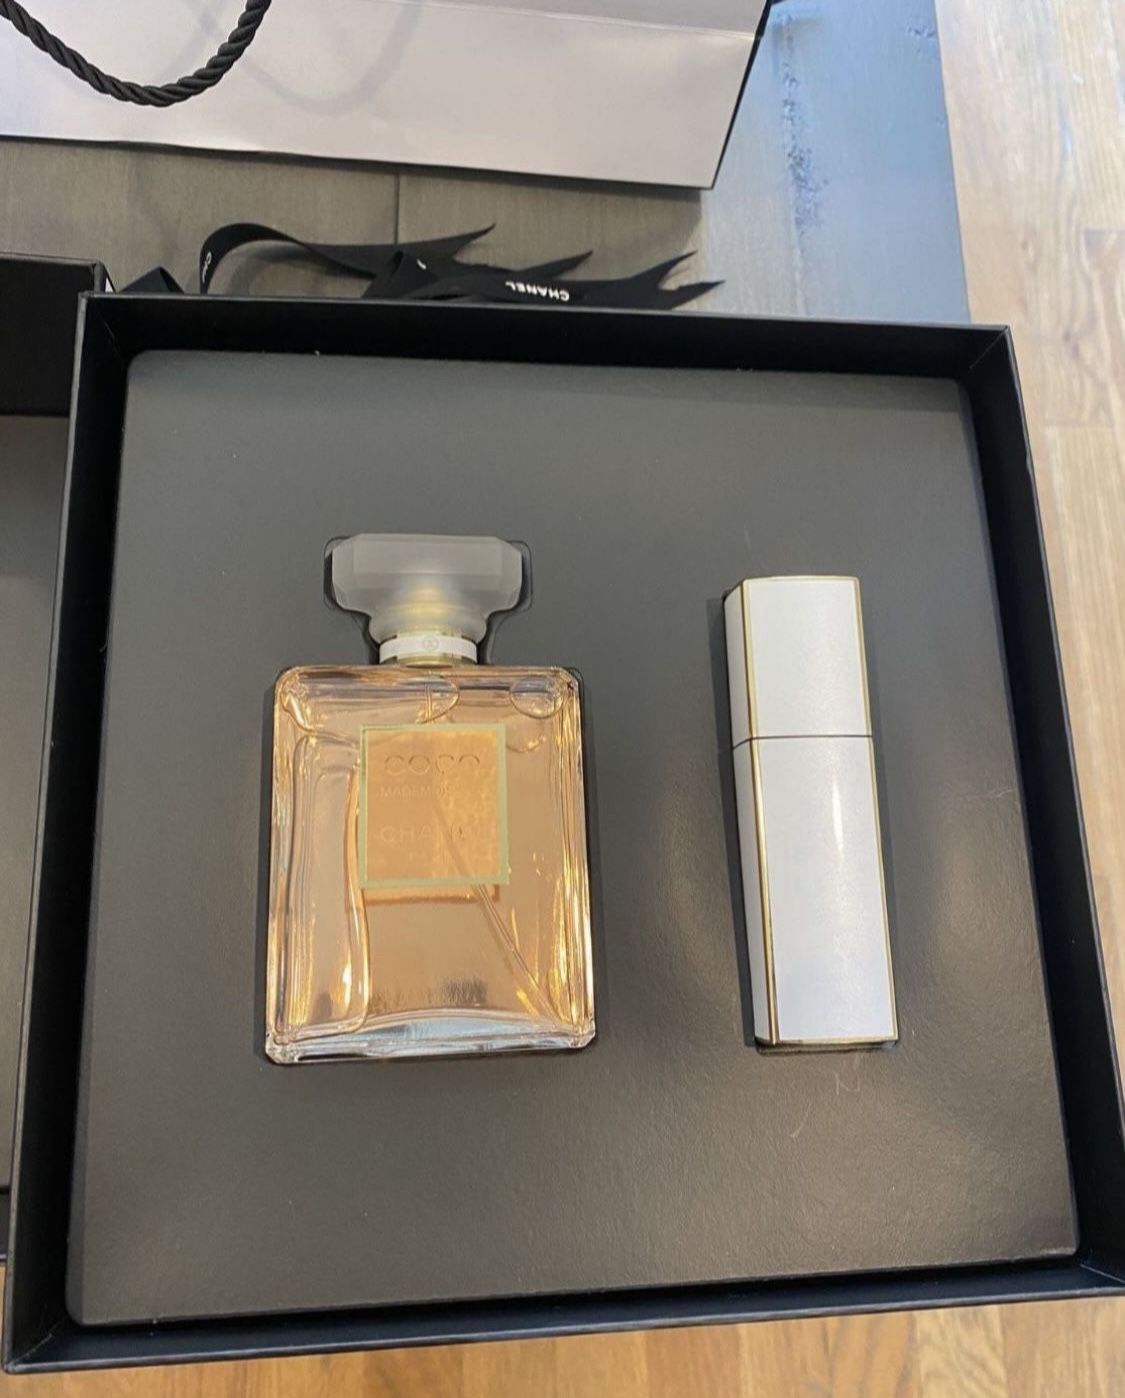 CHANEL COCO MADEMOISELLE GIFT SET for Sale in New York, NY - OfferUp